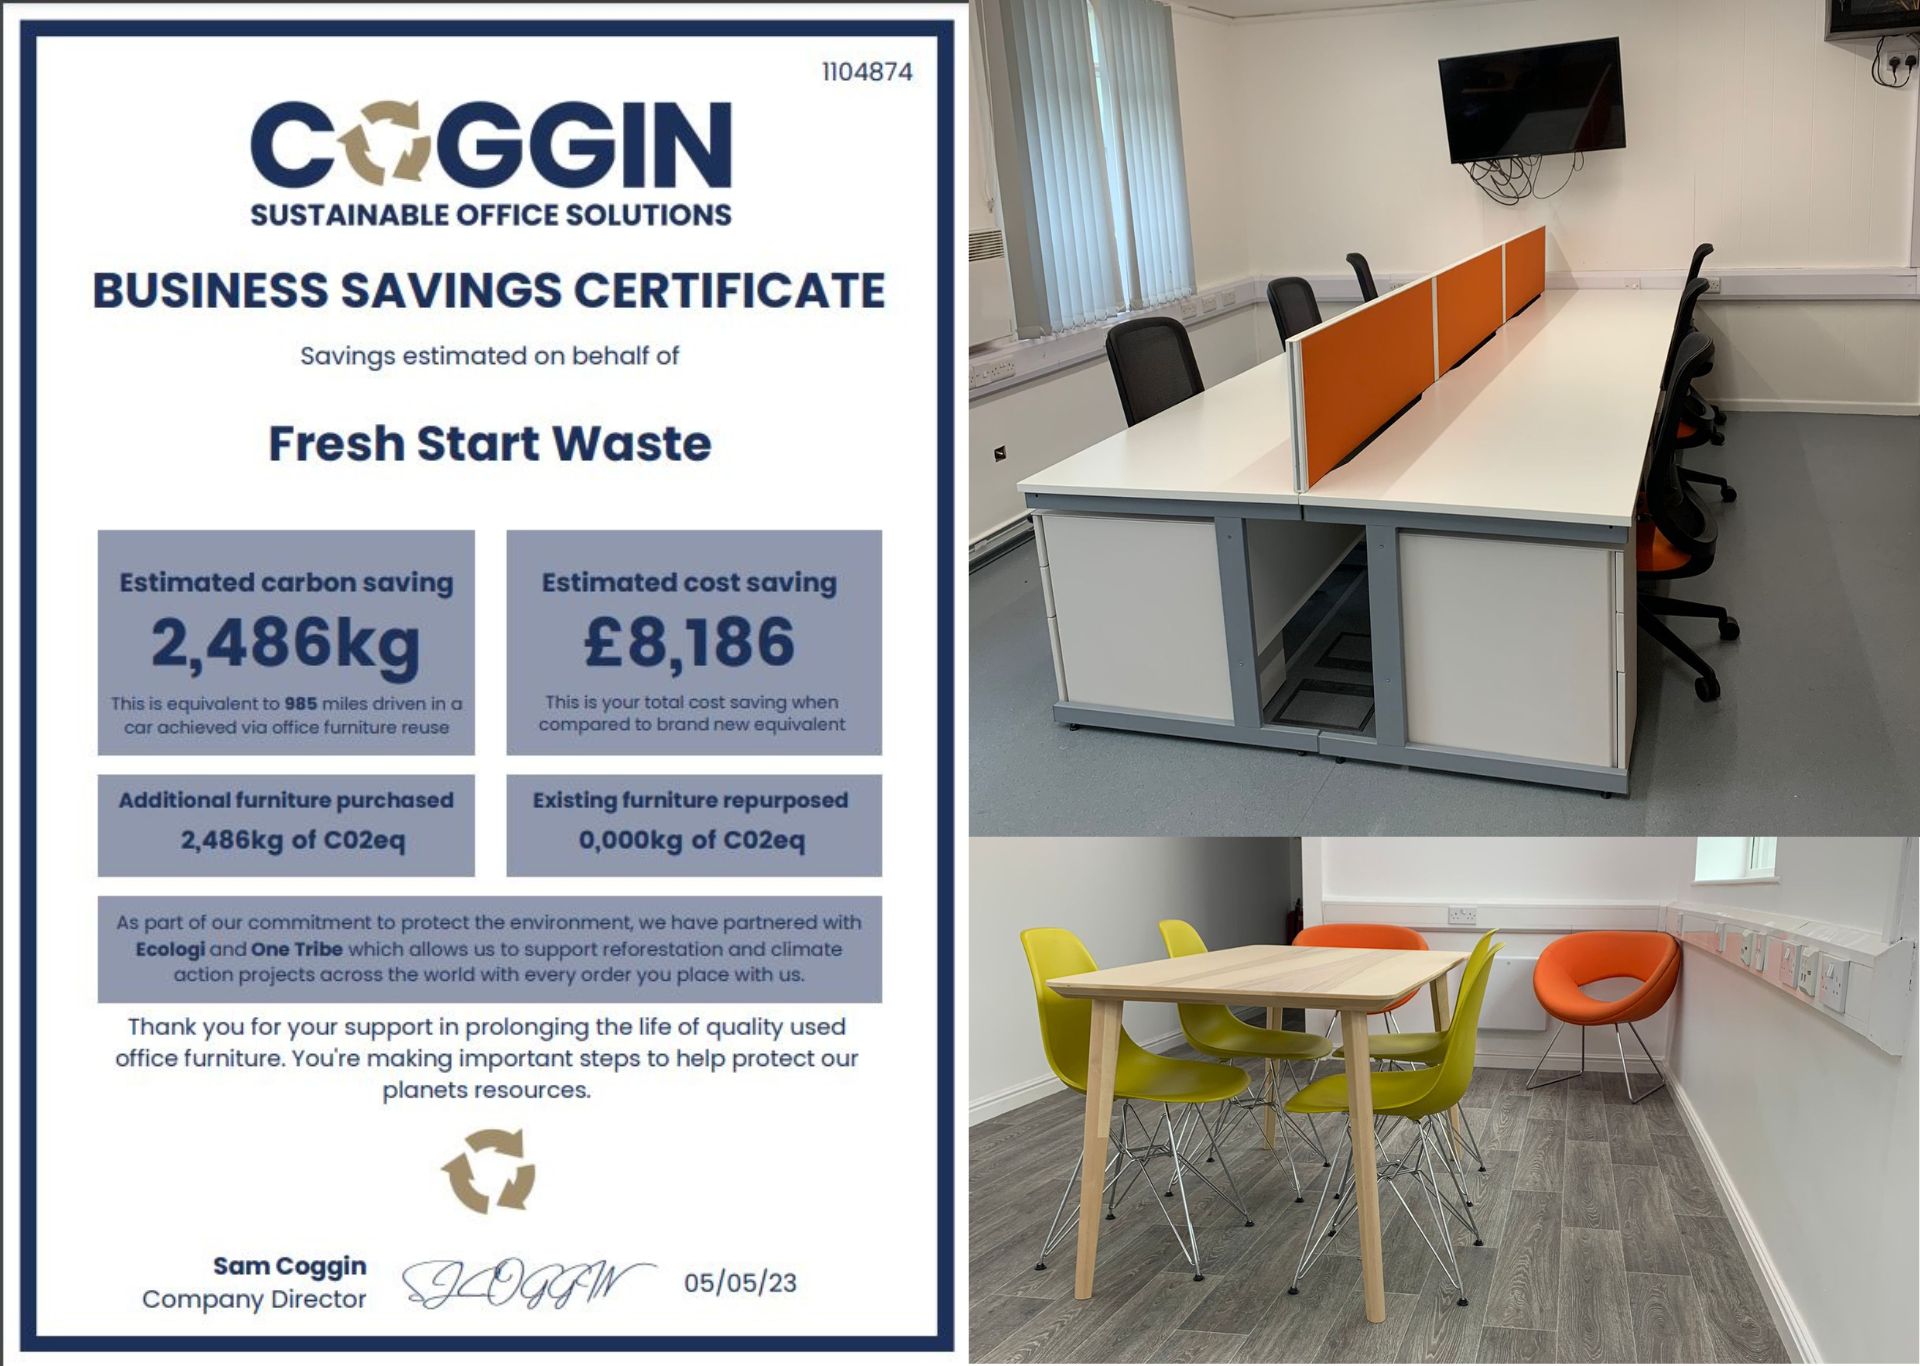 2486kg of carbon saved in office refurbishments